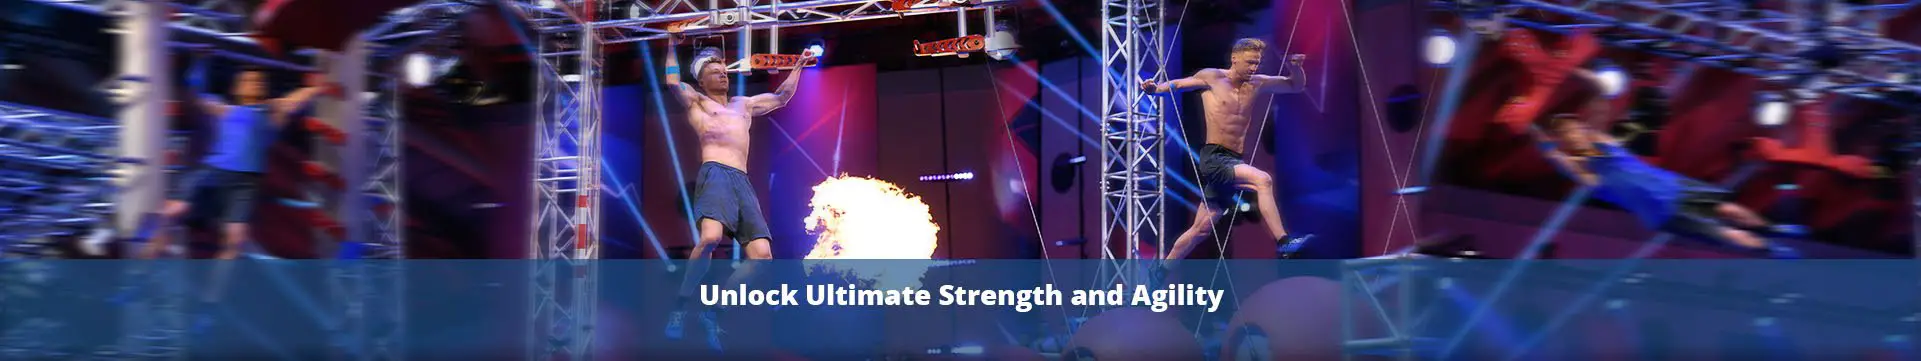 Superhuman Fitness: How to Get Insane Agility and Strength